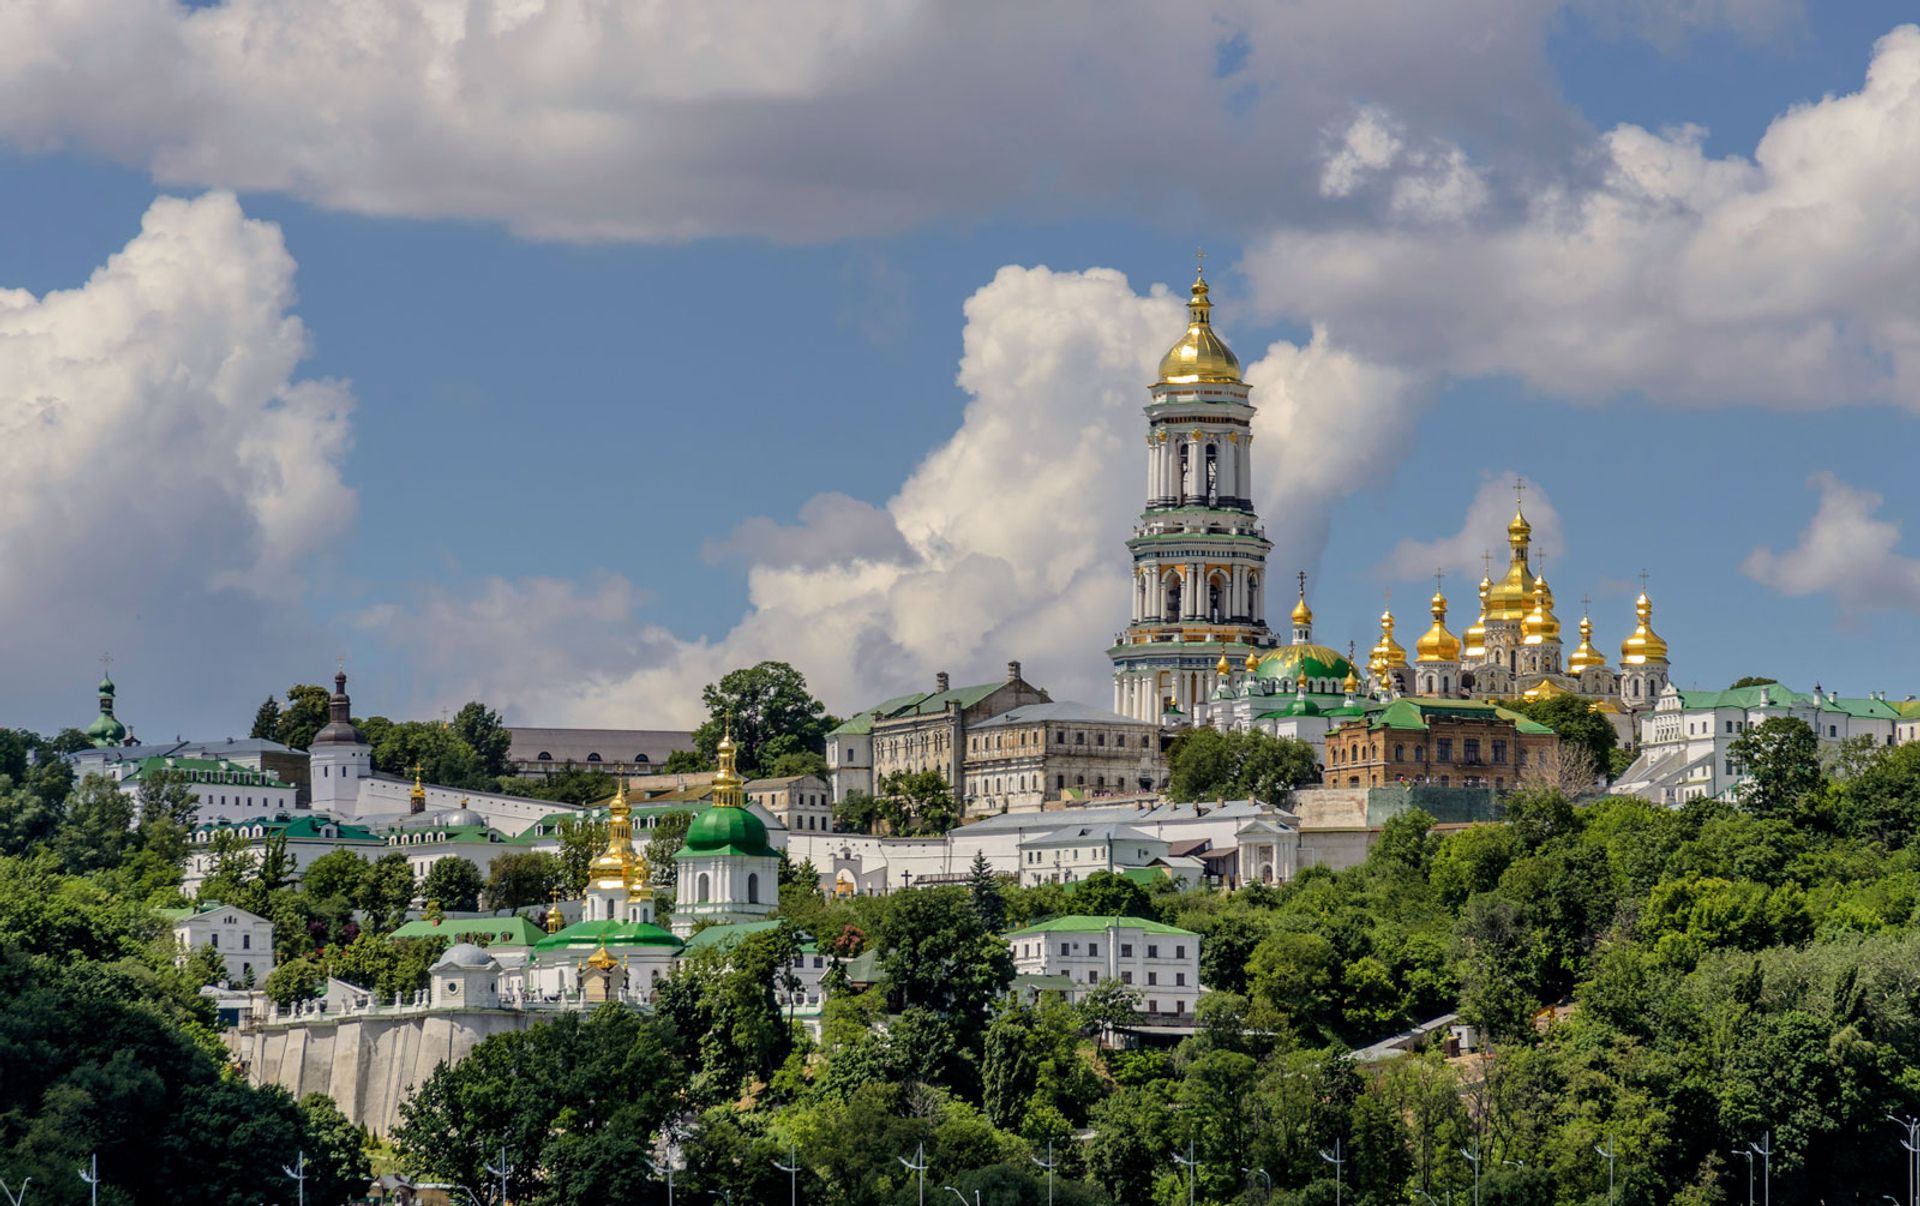 The Monastery of the Caves complex in Kiev Photo: Falin